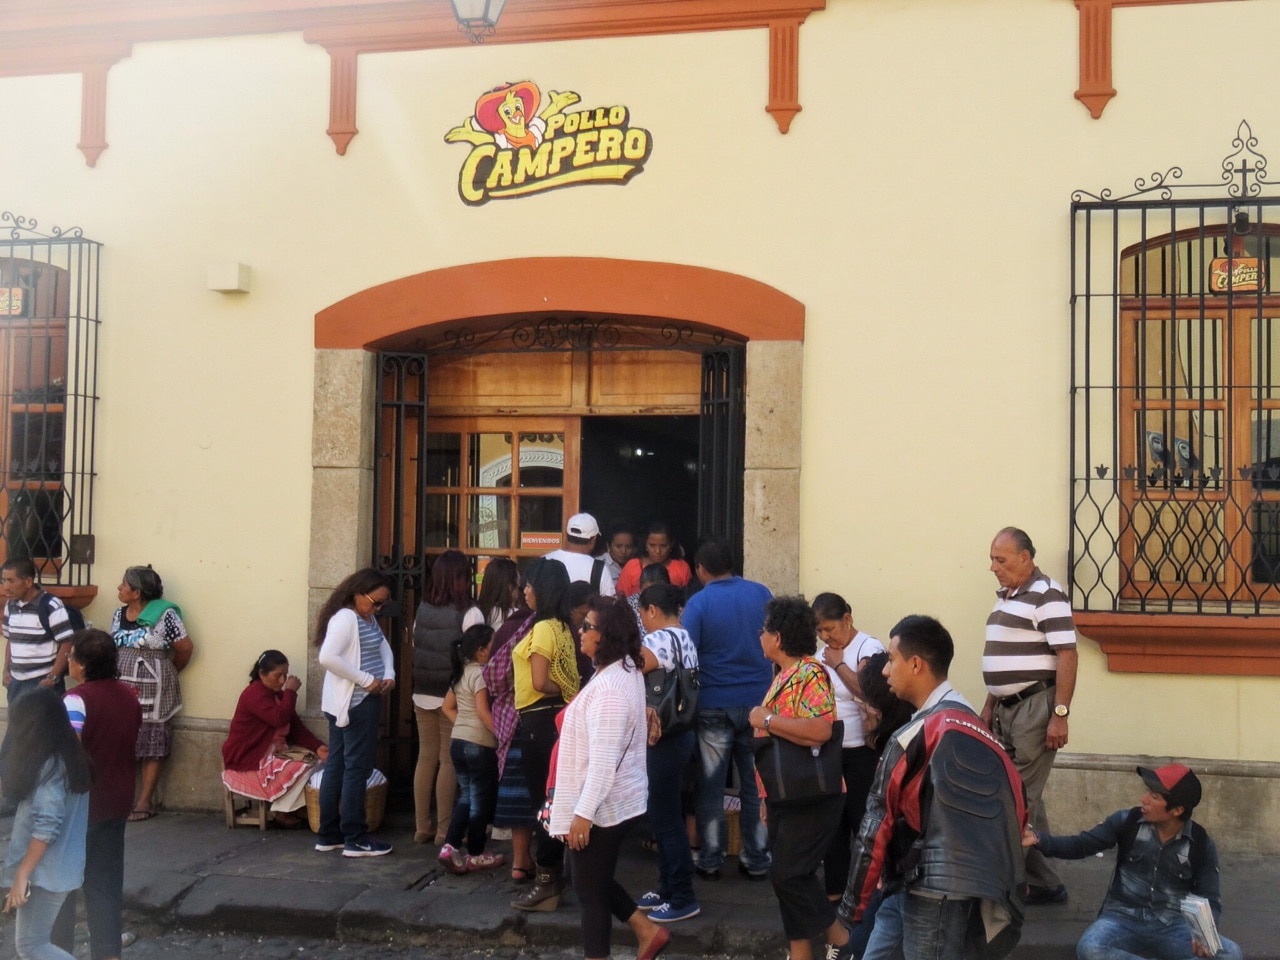 Guatemala’s BELOVED Pollo Campero: Is the Fried Chicken Worth the Wait?